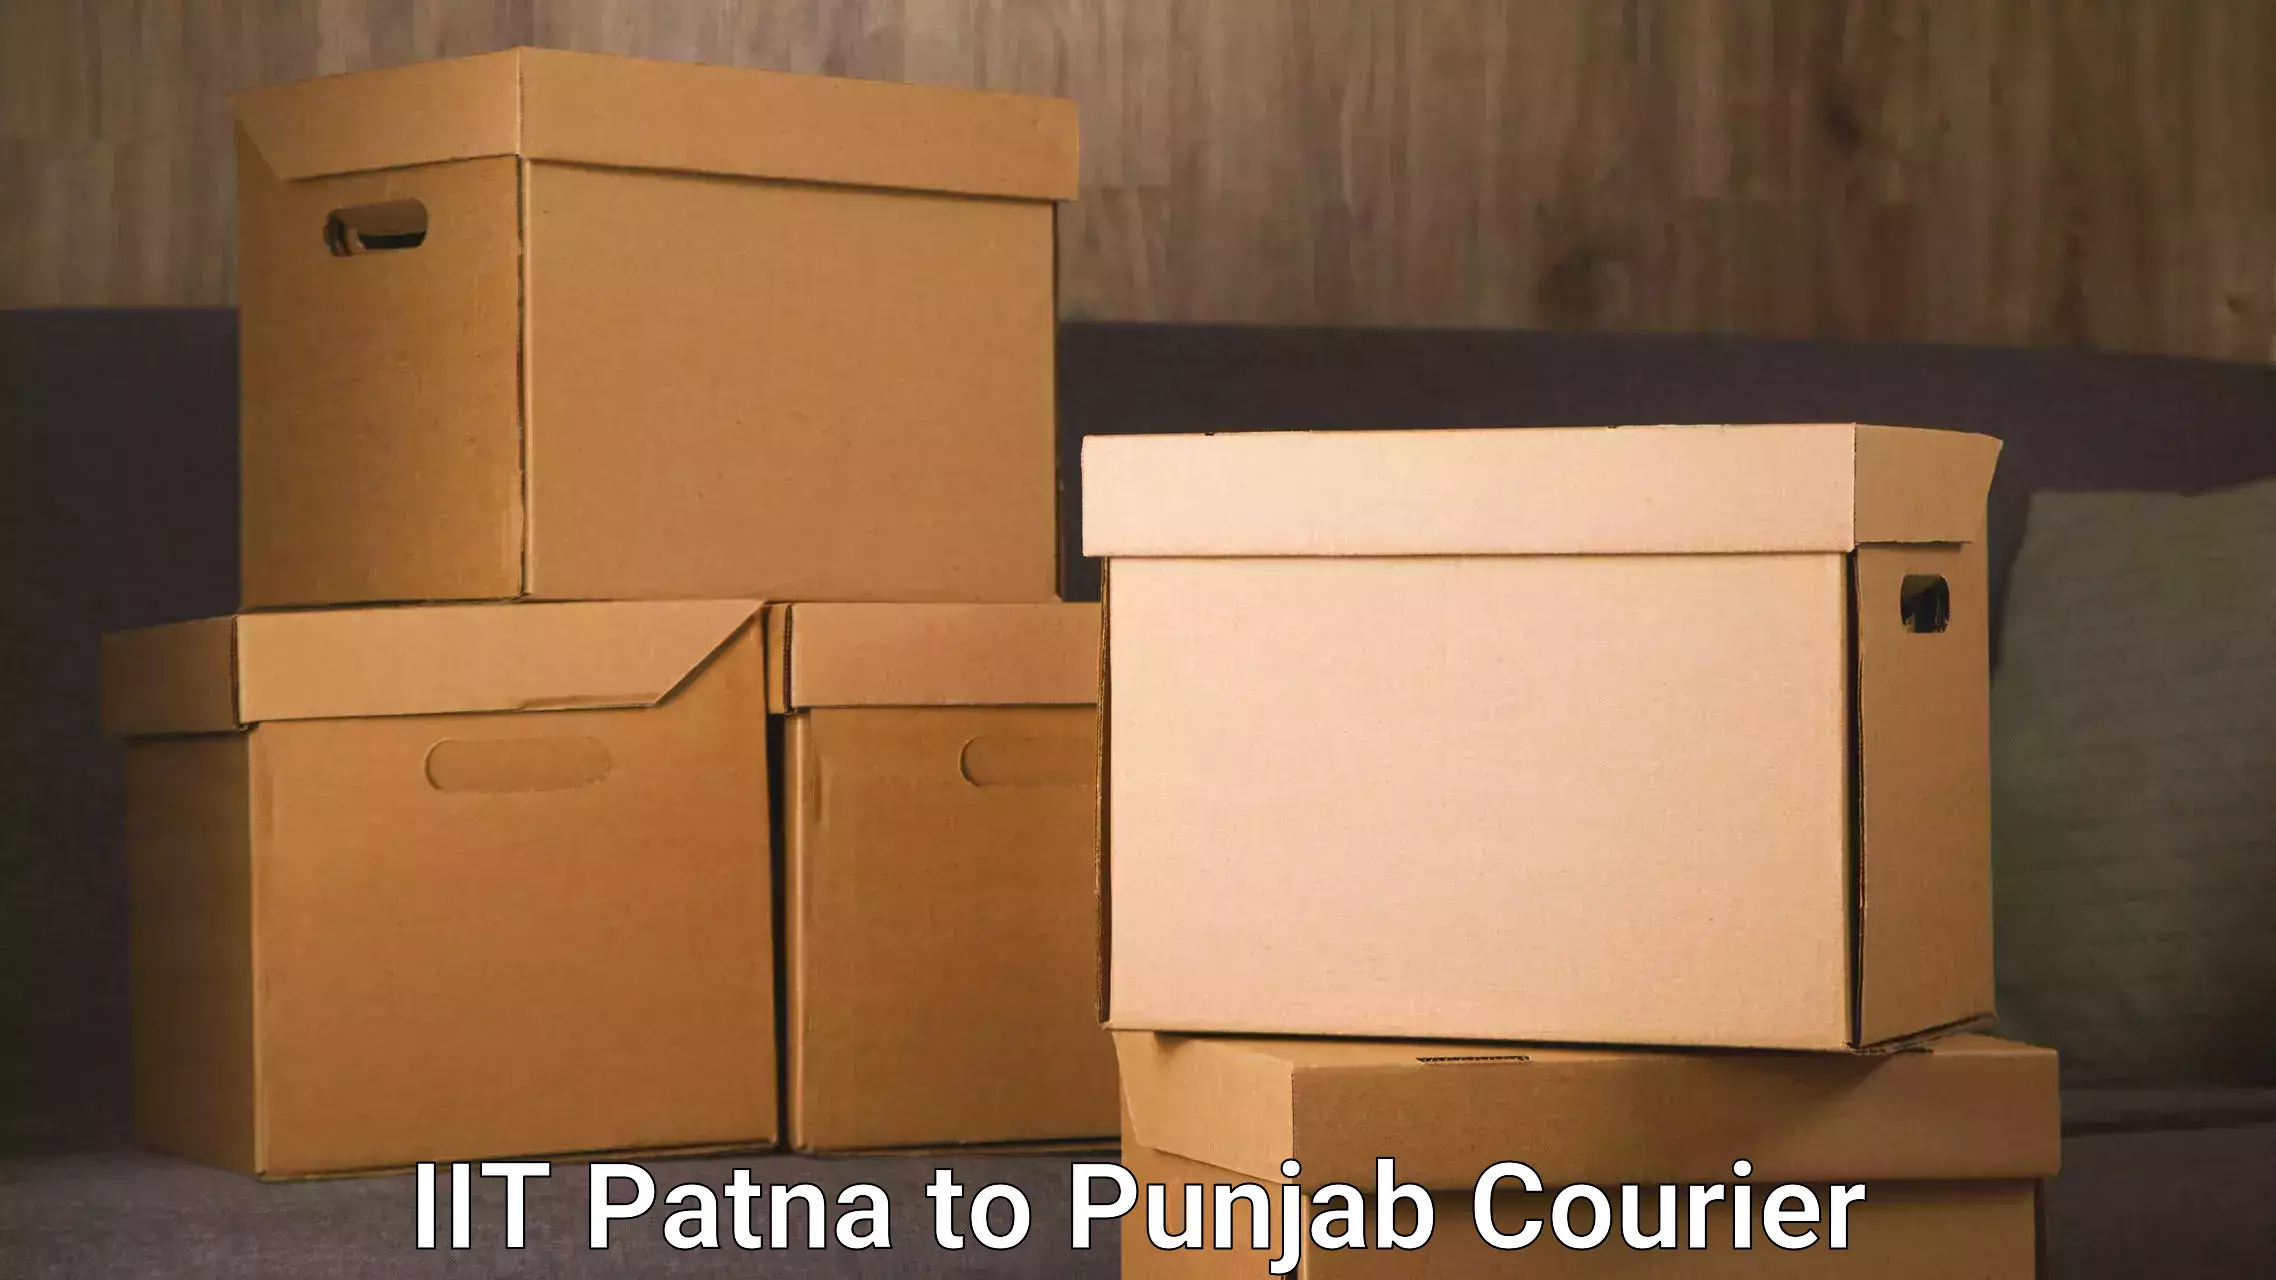 Trusted relocation experts IIT Patna to Punjab